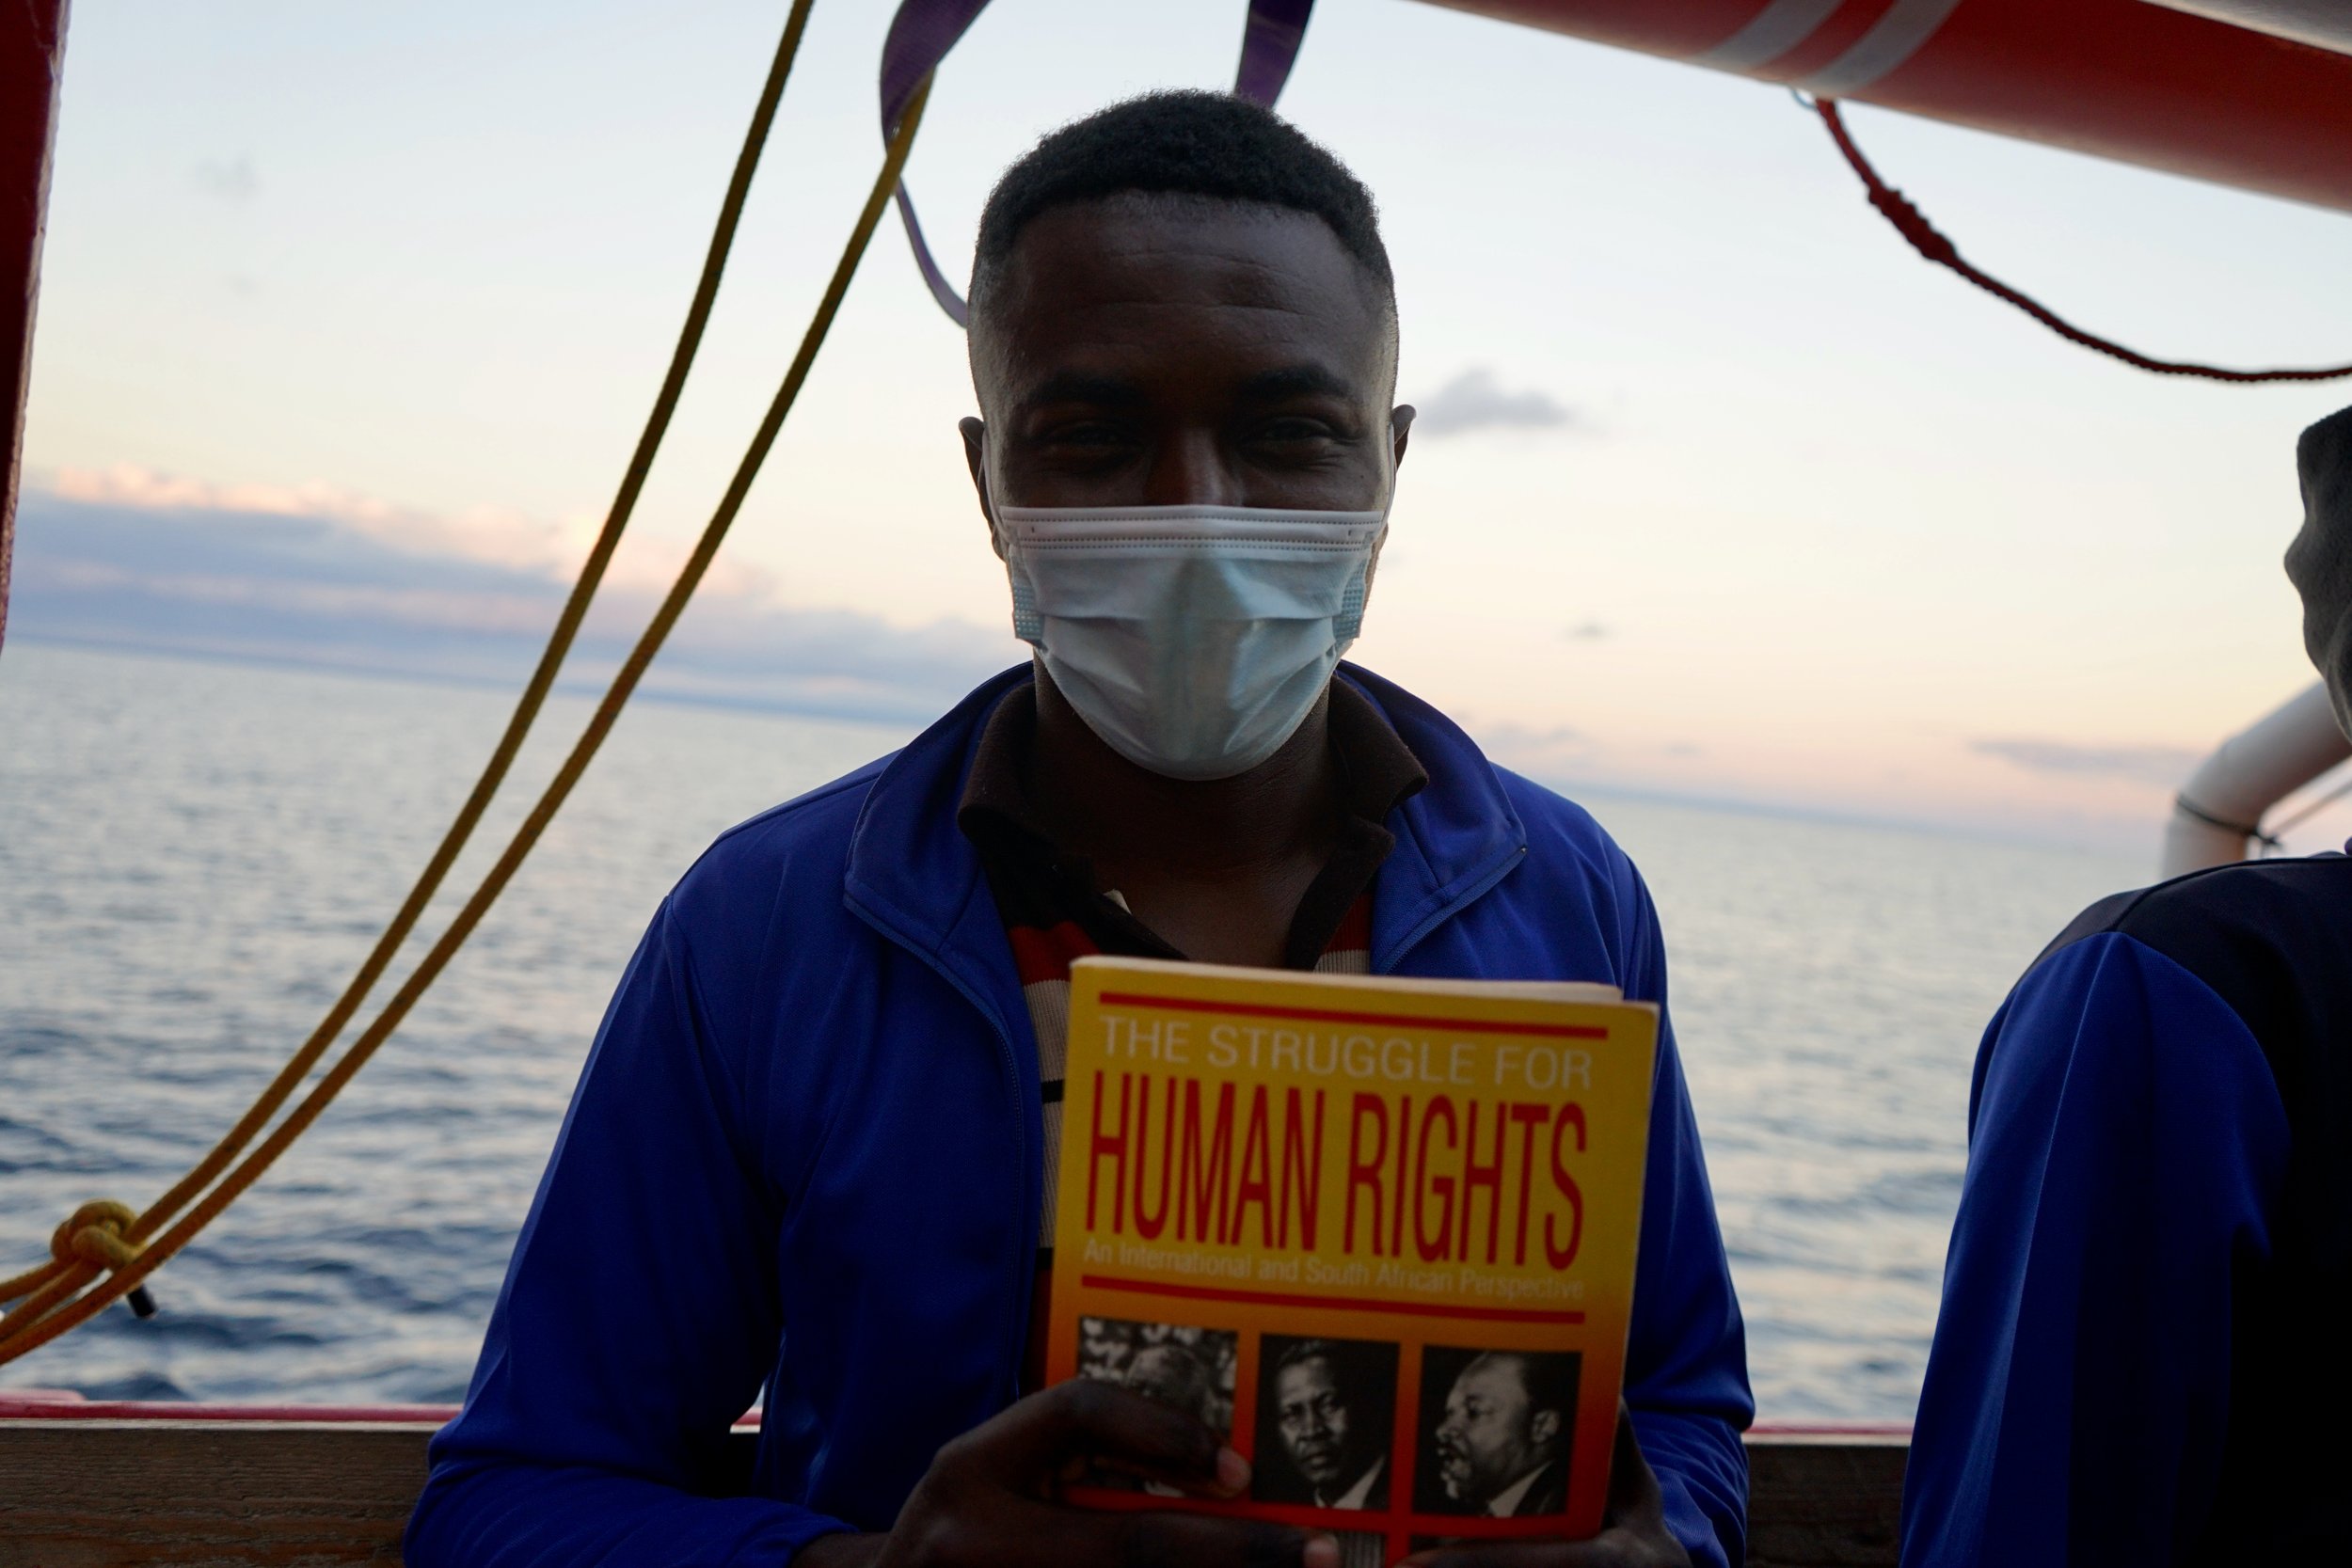 A survivor holds a book in his arms which he has been reading about human rights during the wait for place of safety. 